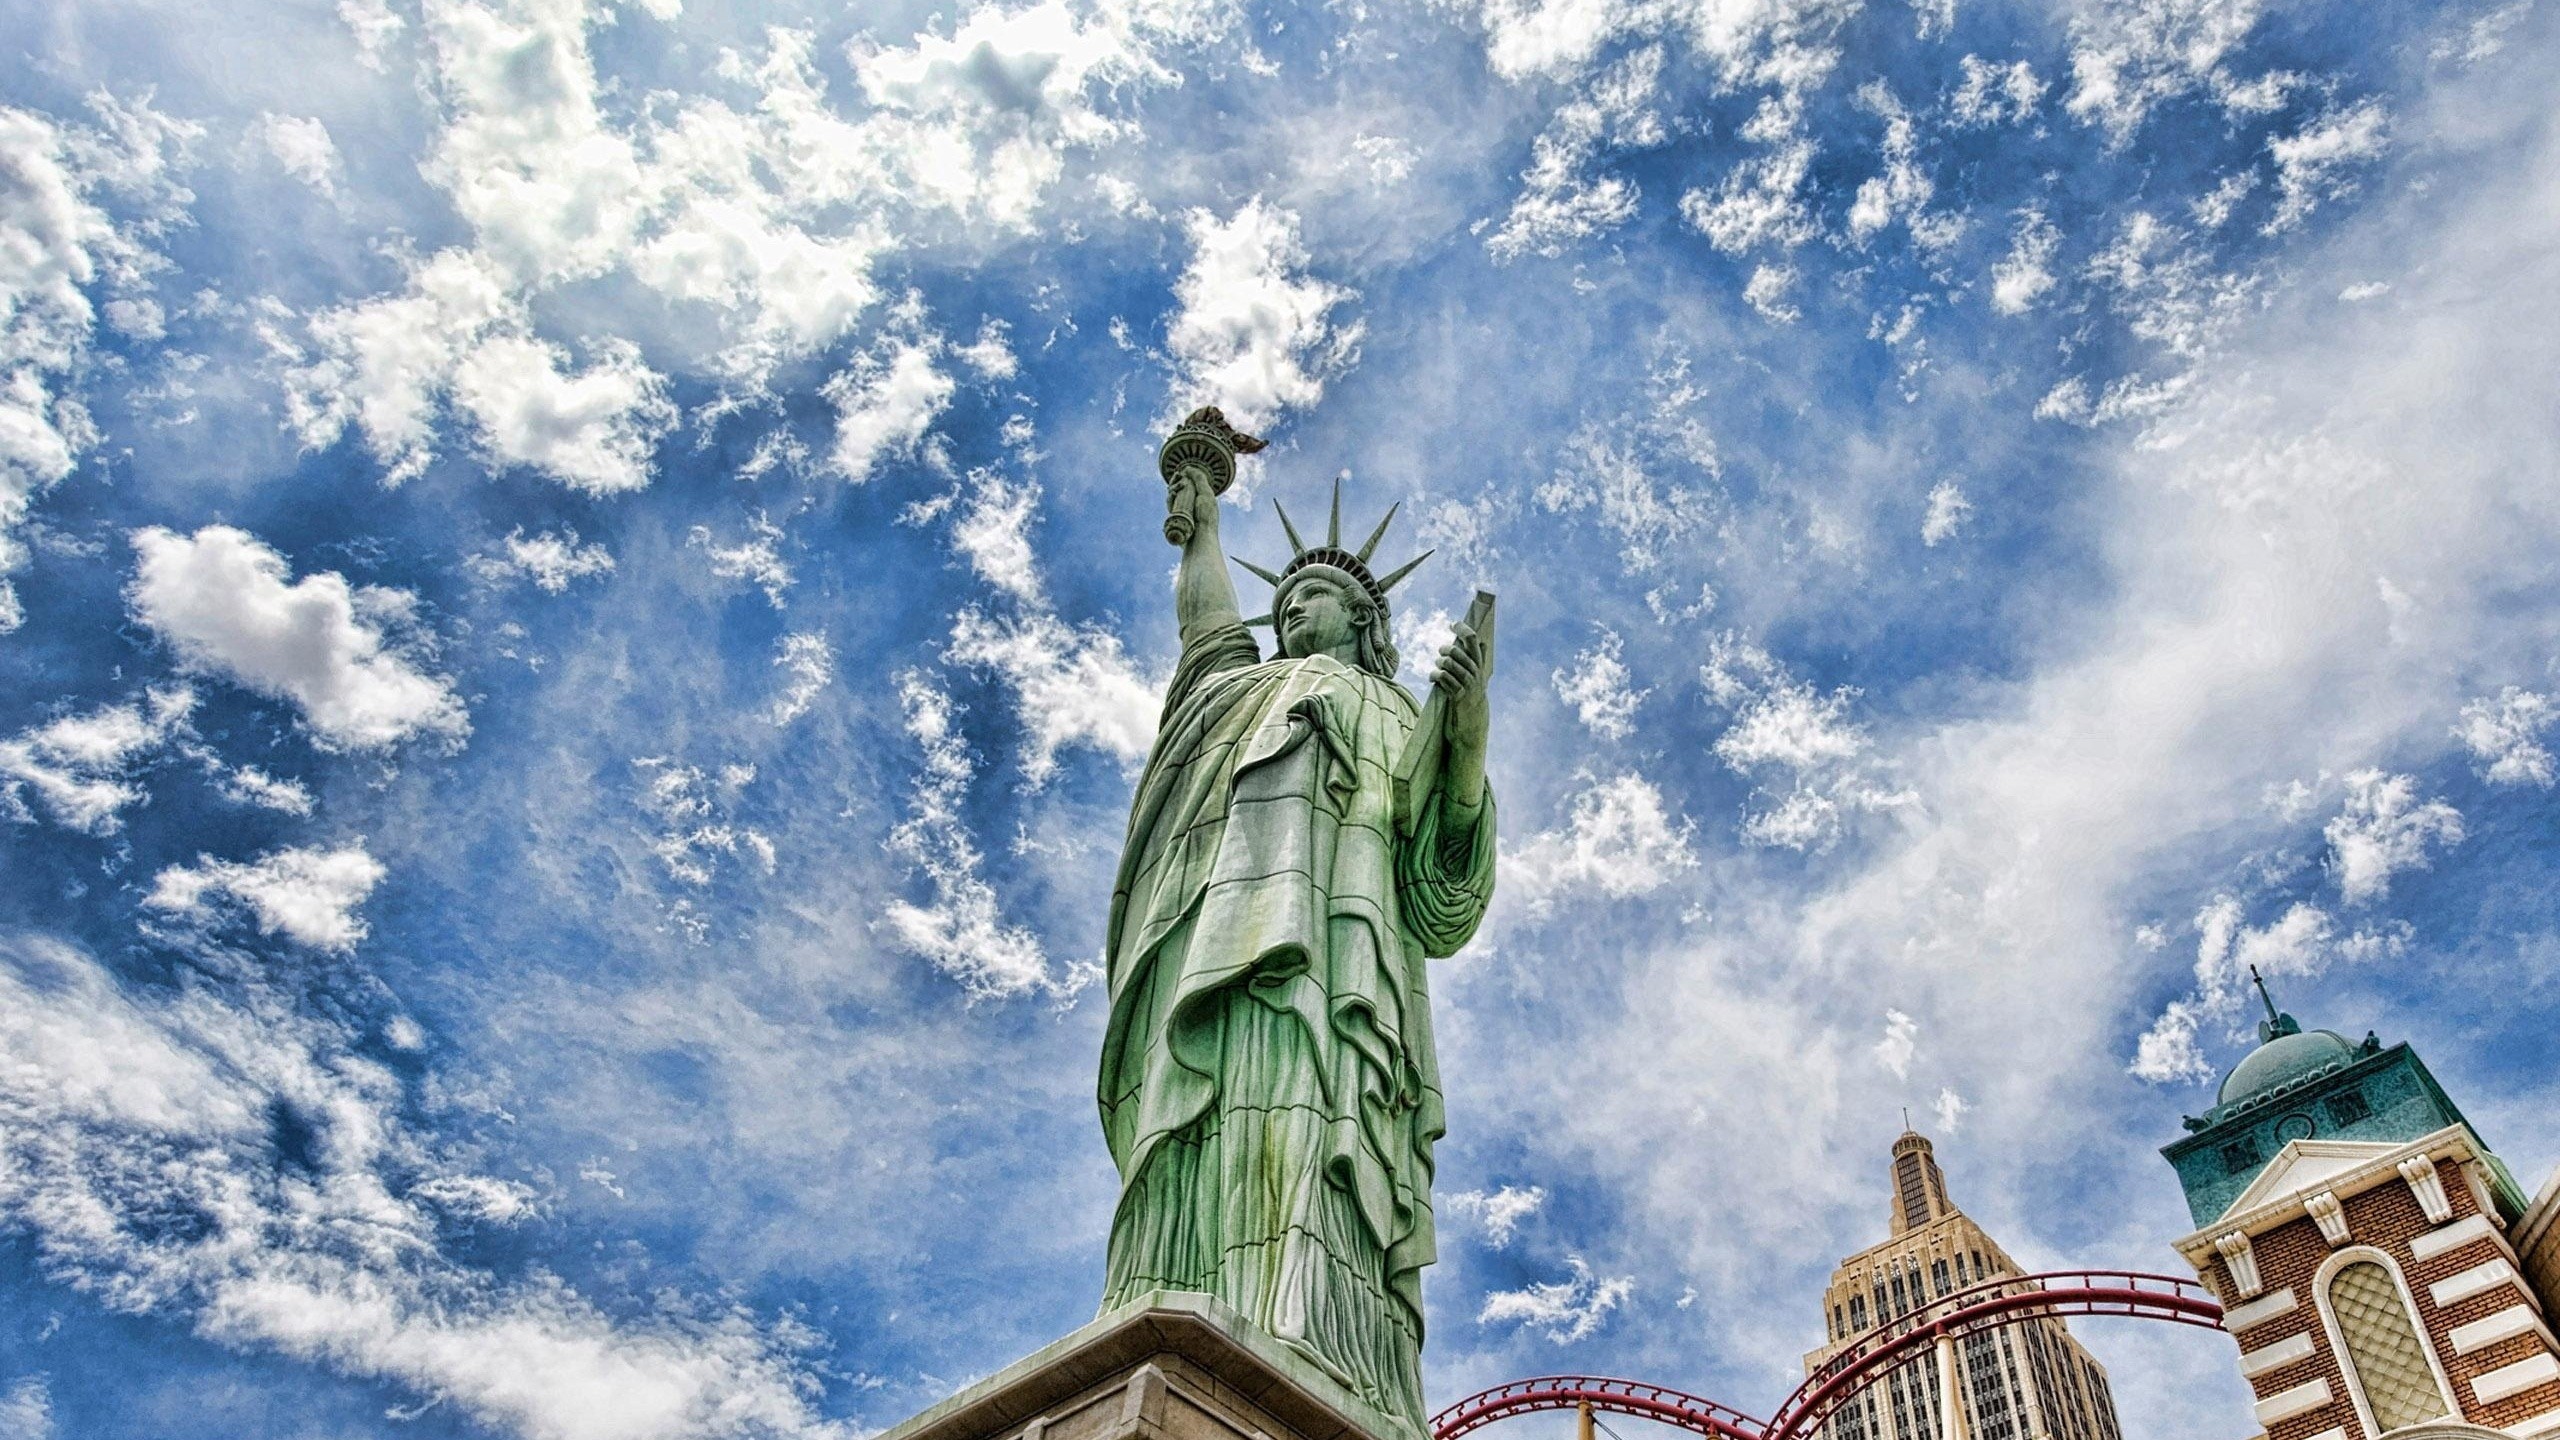 General 2560x1440 USA sky Statue of Liberty